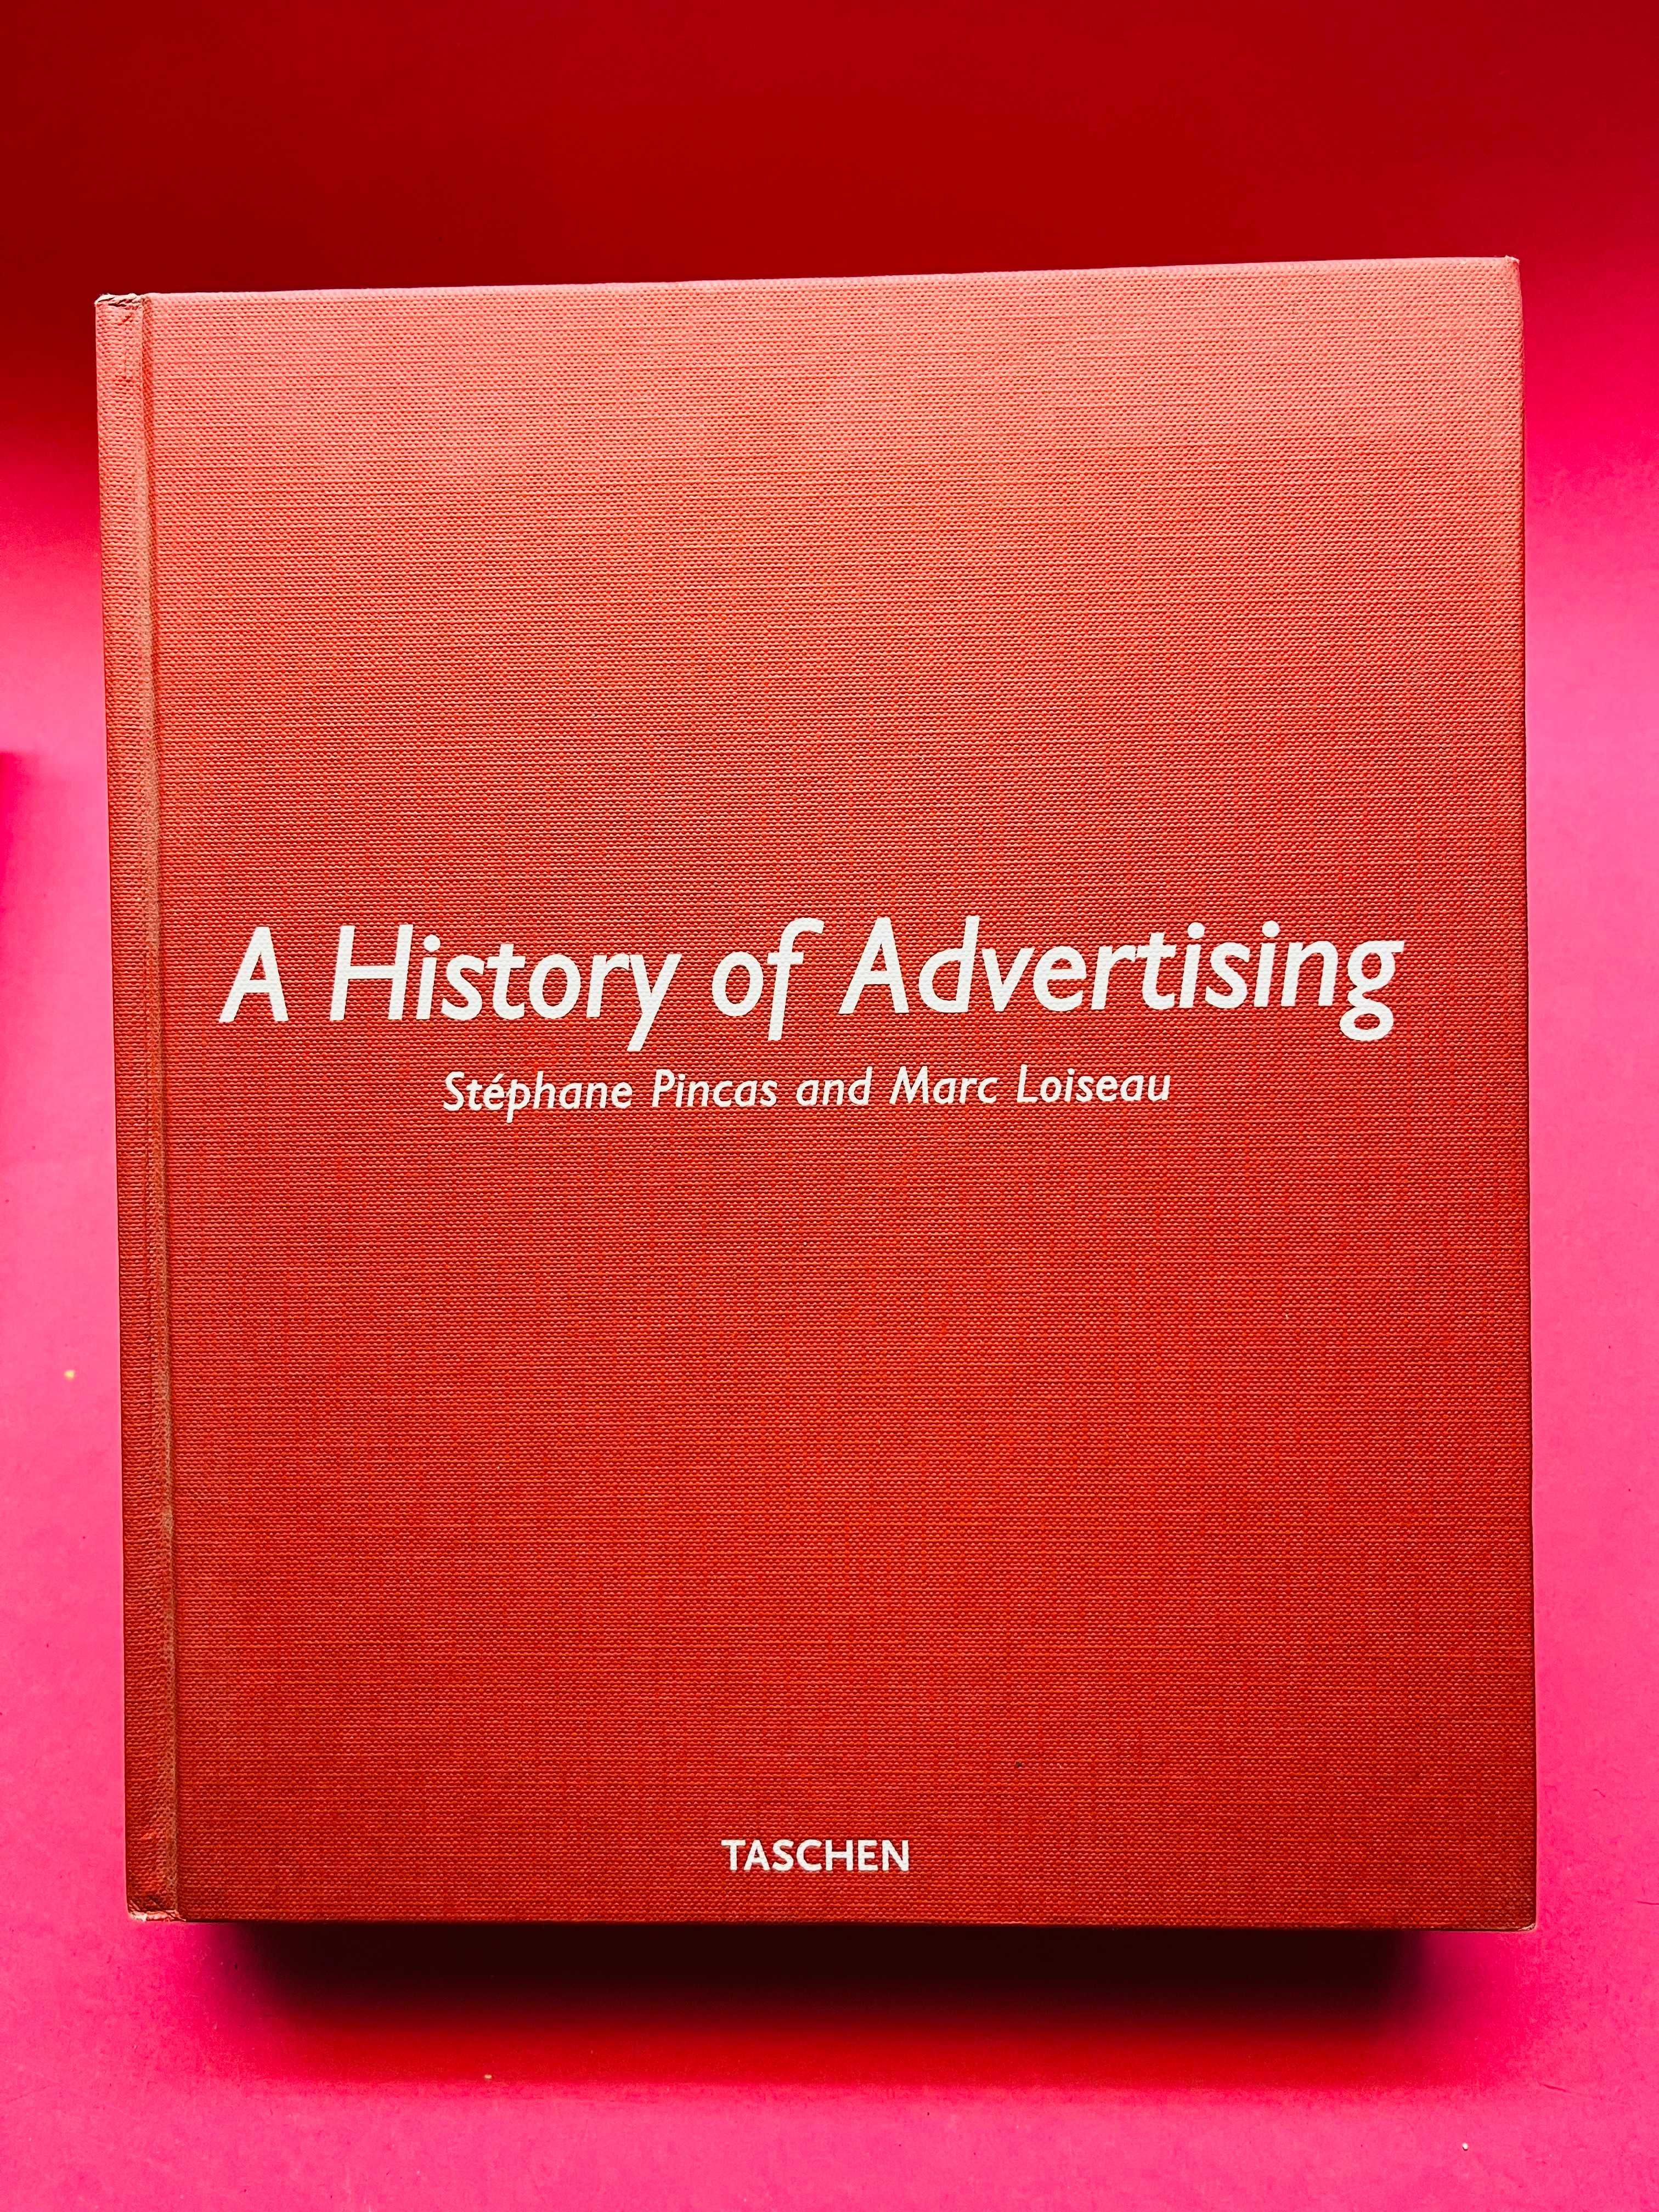 A History of Advertising - Taschen